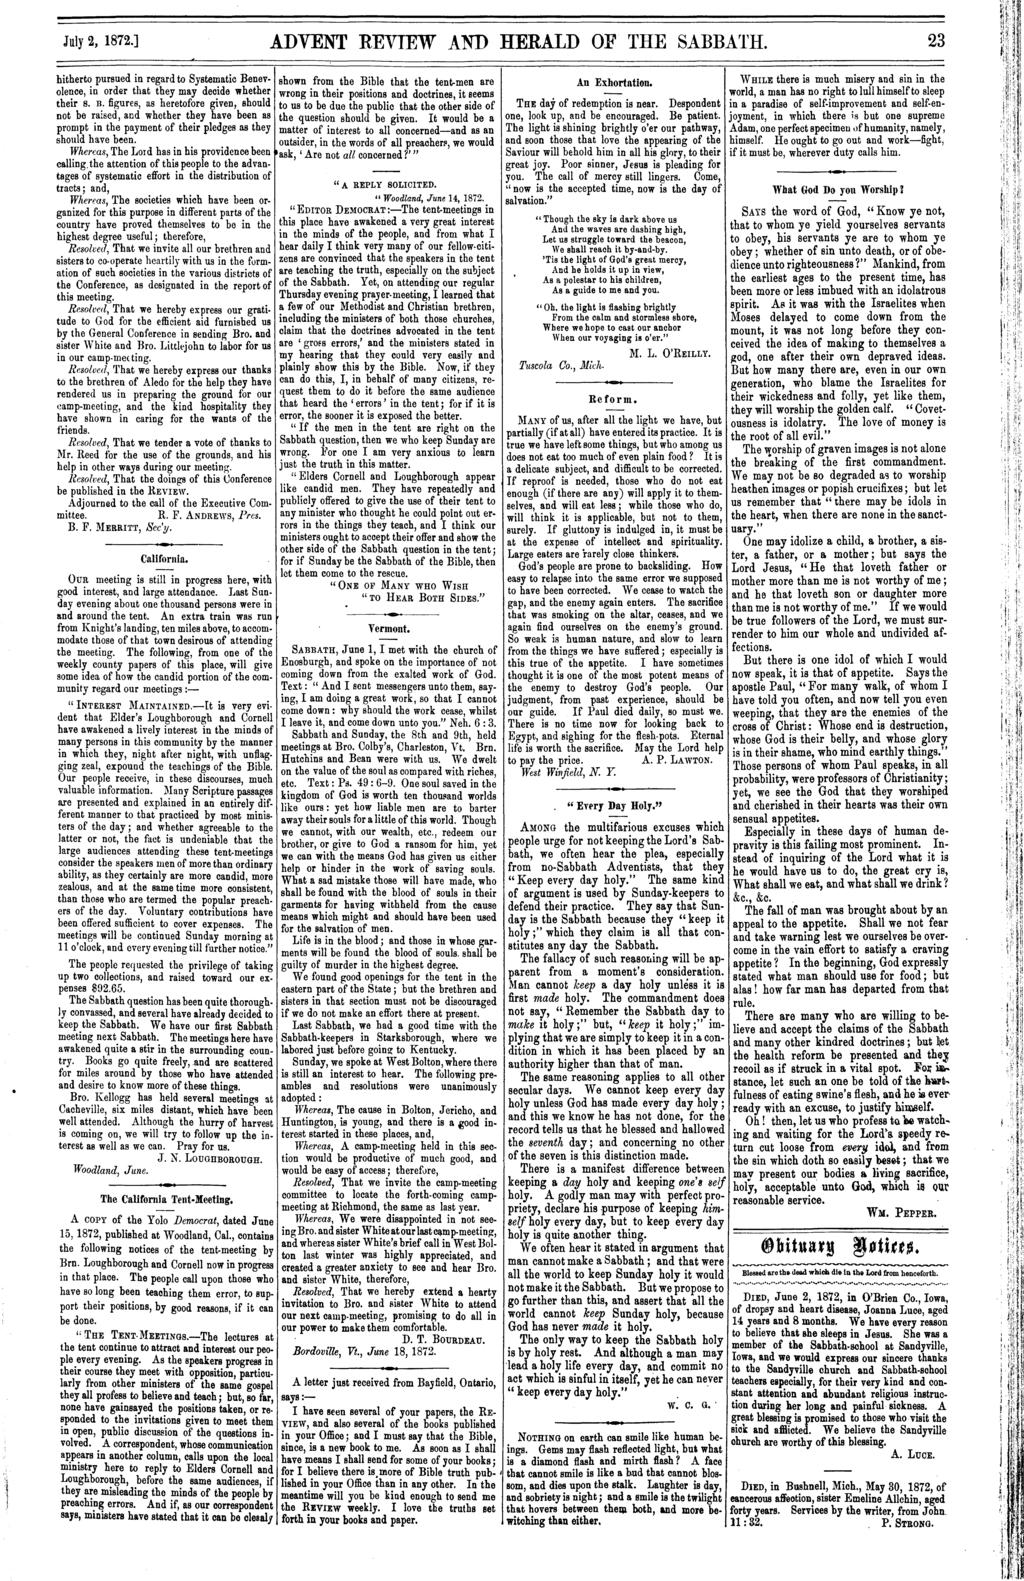 July 2, 1872.] ADVENT REVIEW AND HERALD OF THE SABBATH. 23 iterto pursue in regar to Systematic Benevolence in orer tat tey may ecie weter teir ~- n.